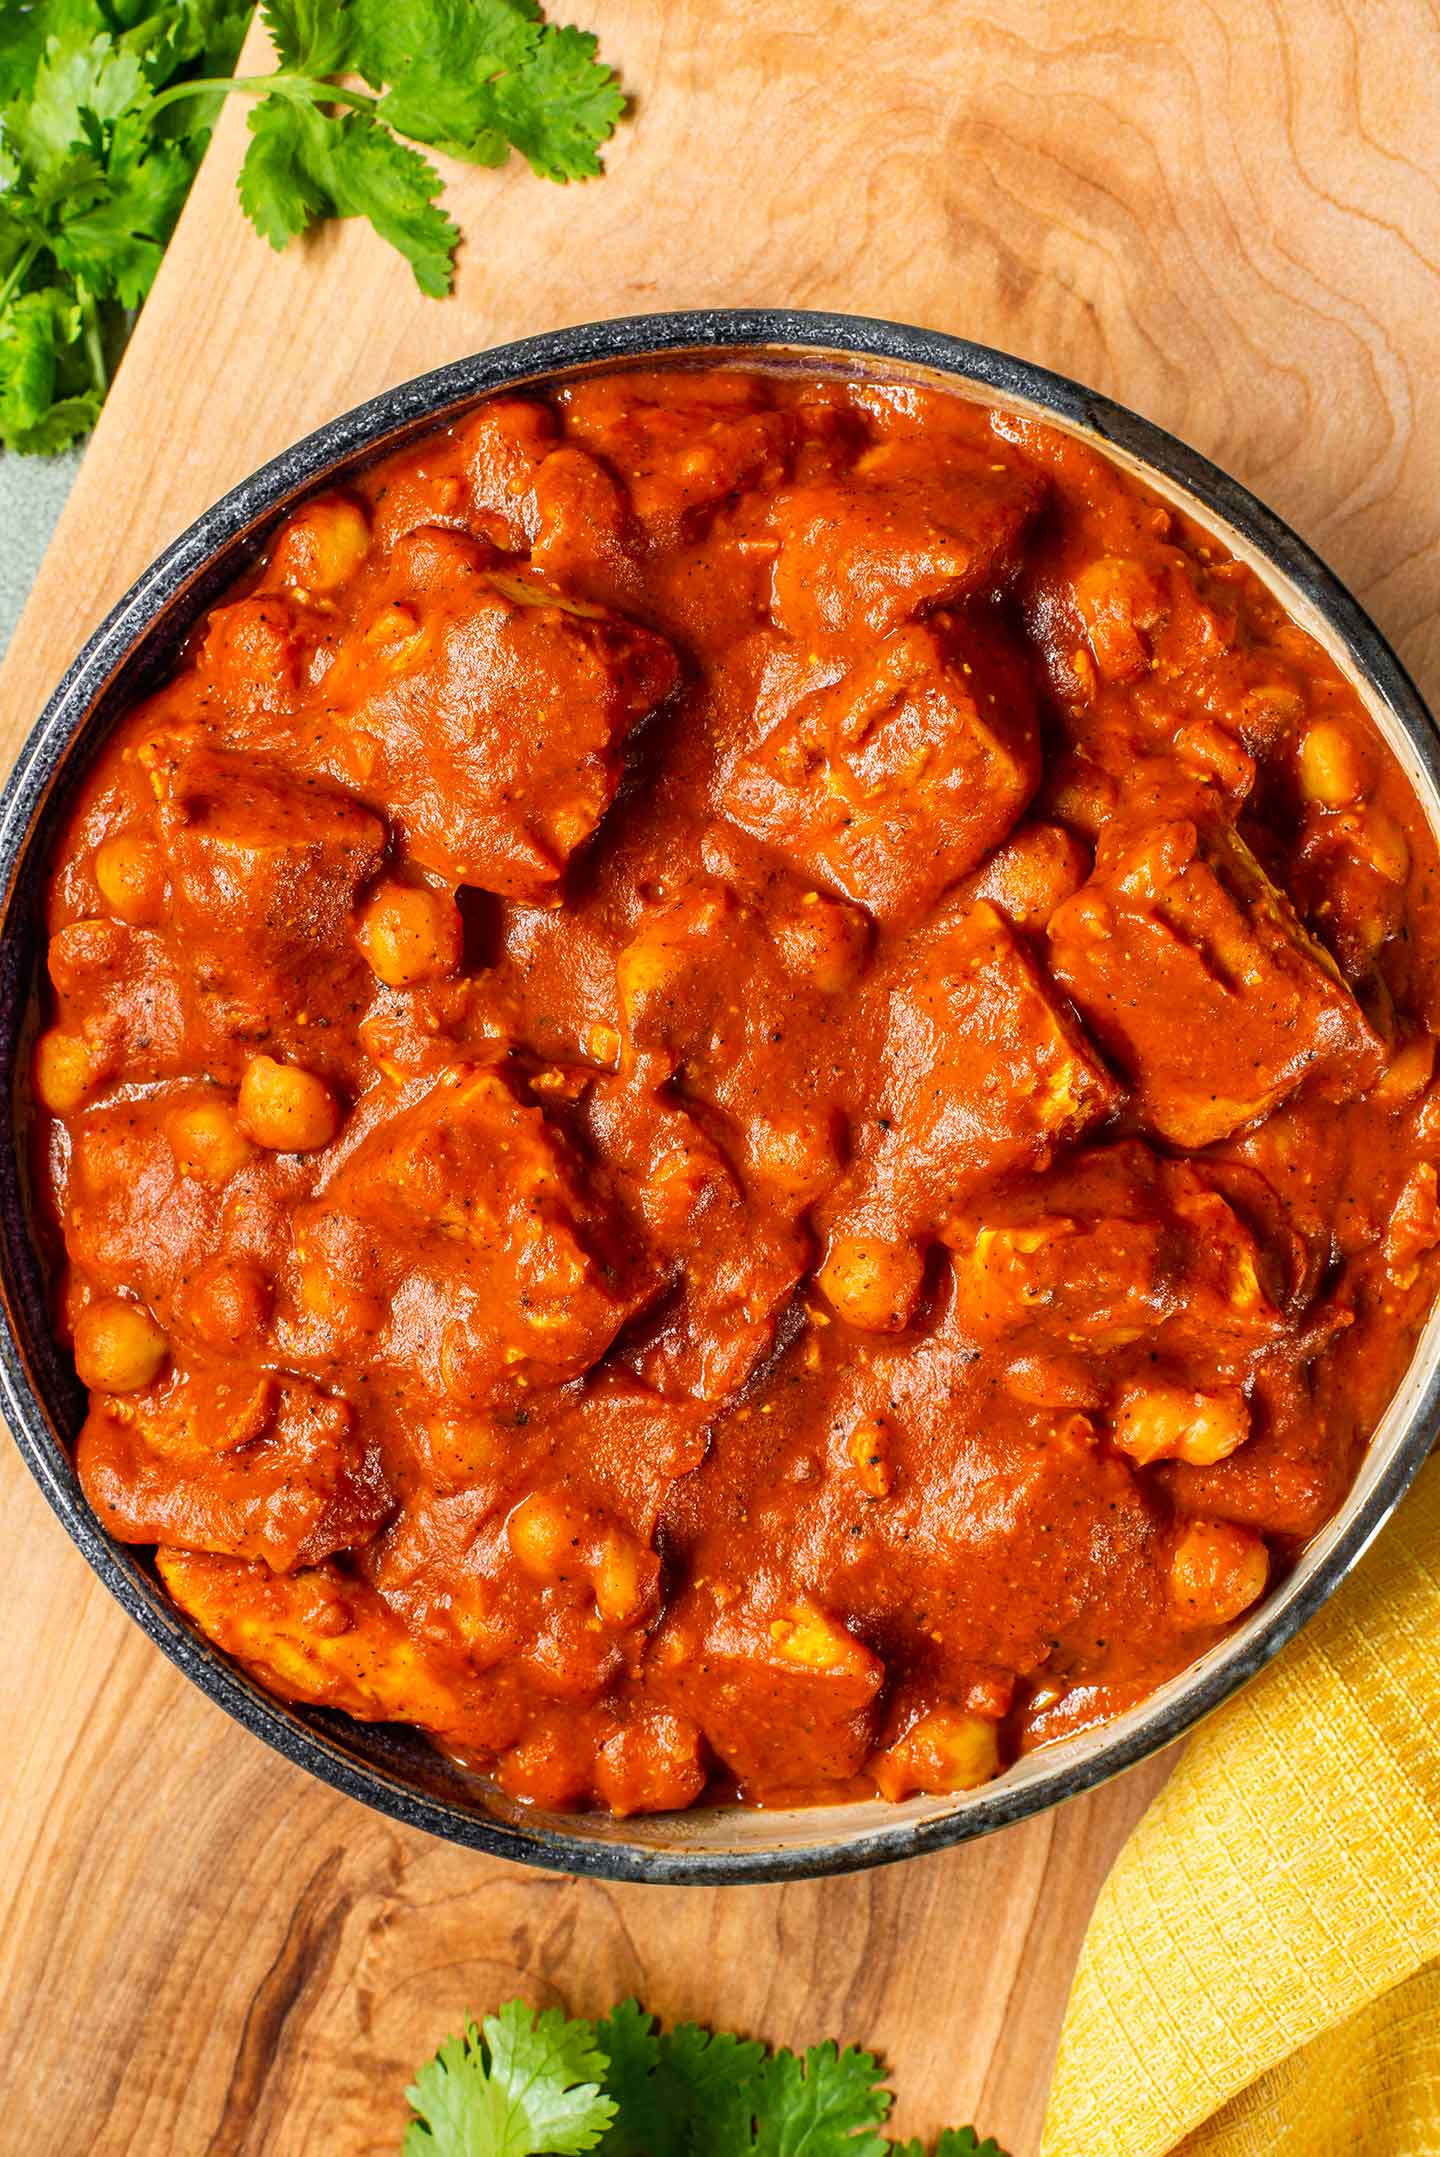 Top down view of a bowl full of thick and creamy vegan butter chicken. The sauce is reddish brown and coating chunks of tofu and chickpeas.